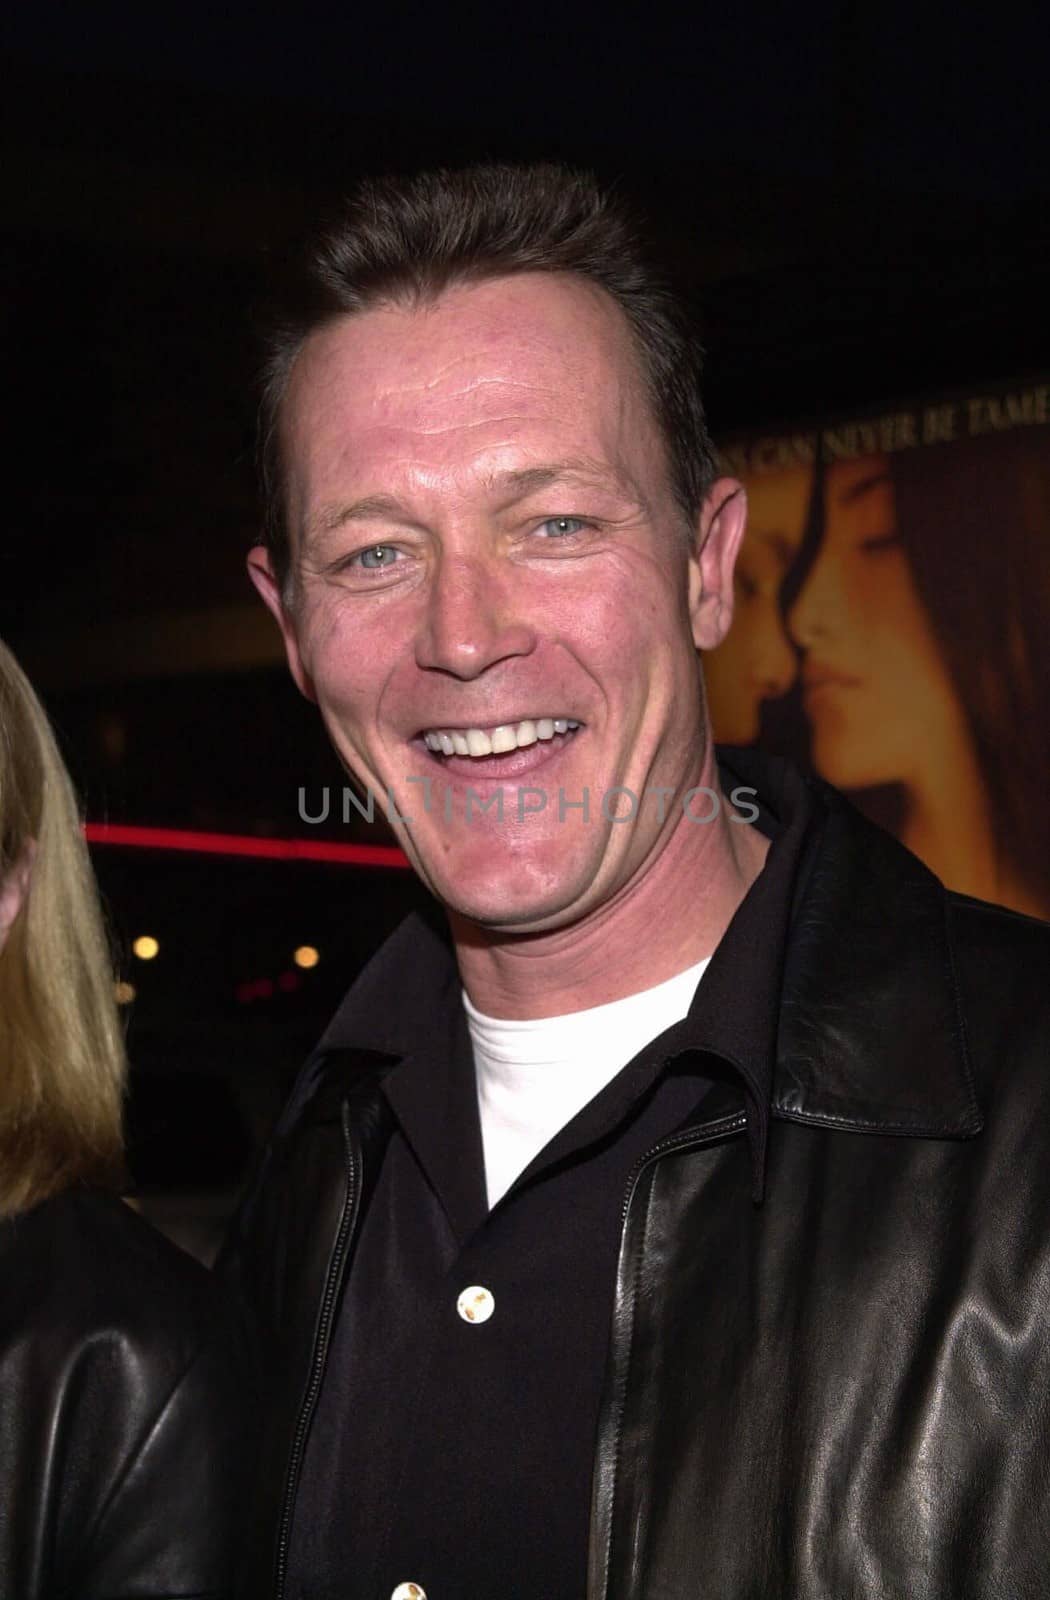 Robert Patrick at the premiere of Miramax's "All The Pretty Horses," in Westwood, 12-17-00